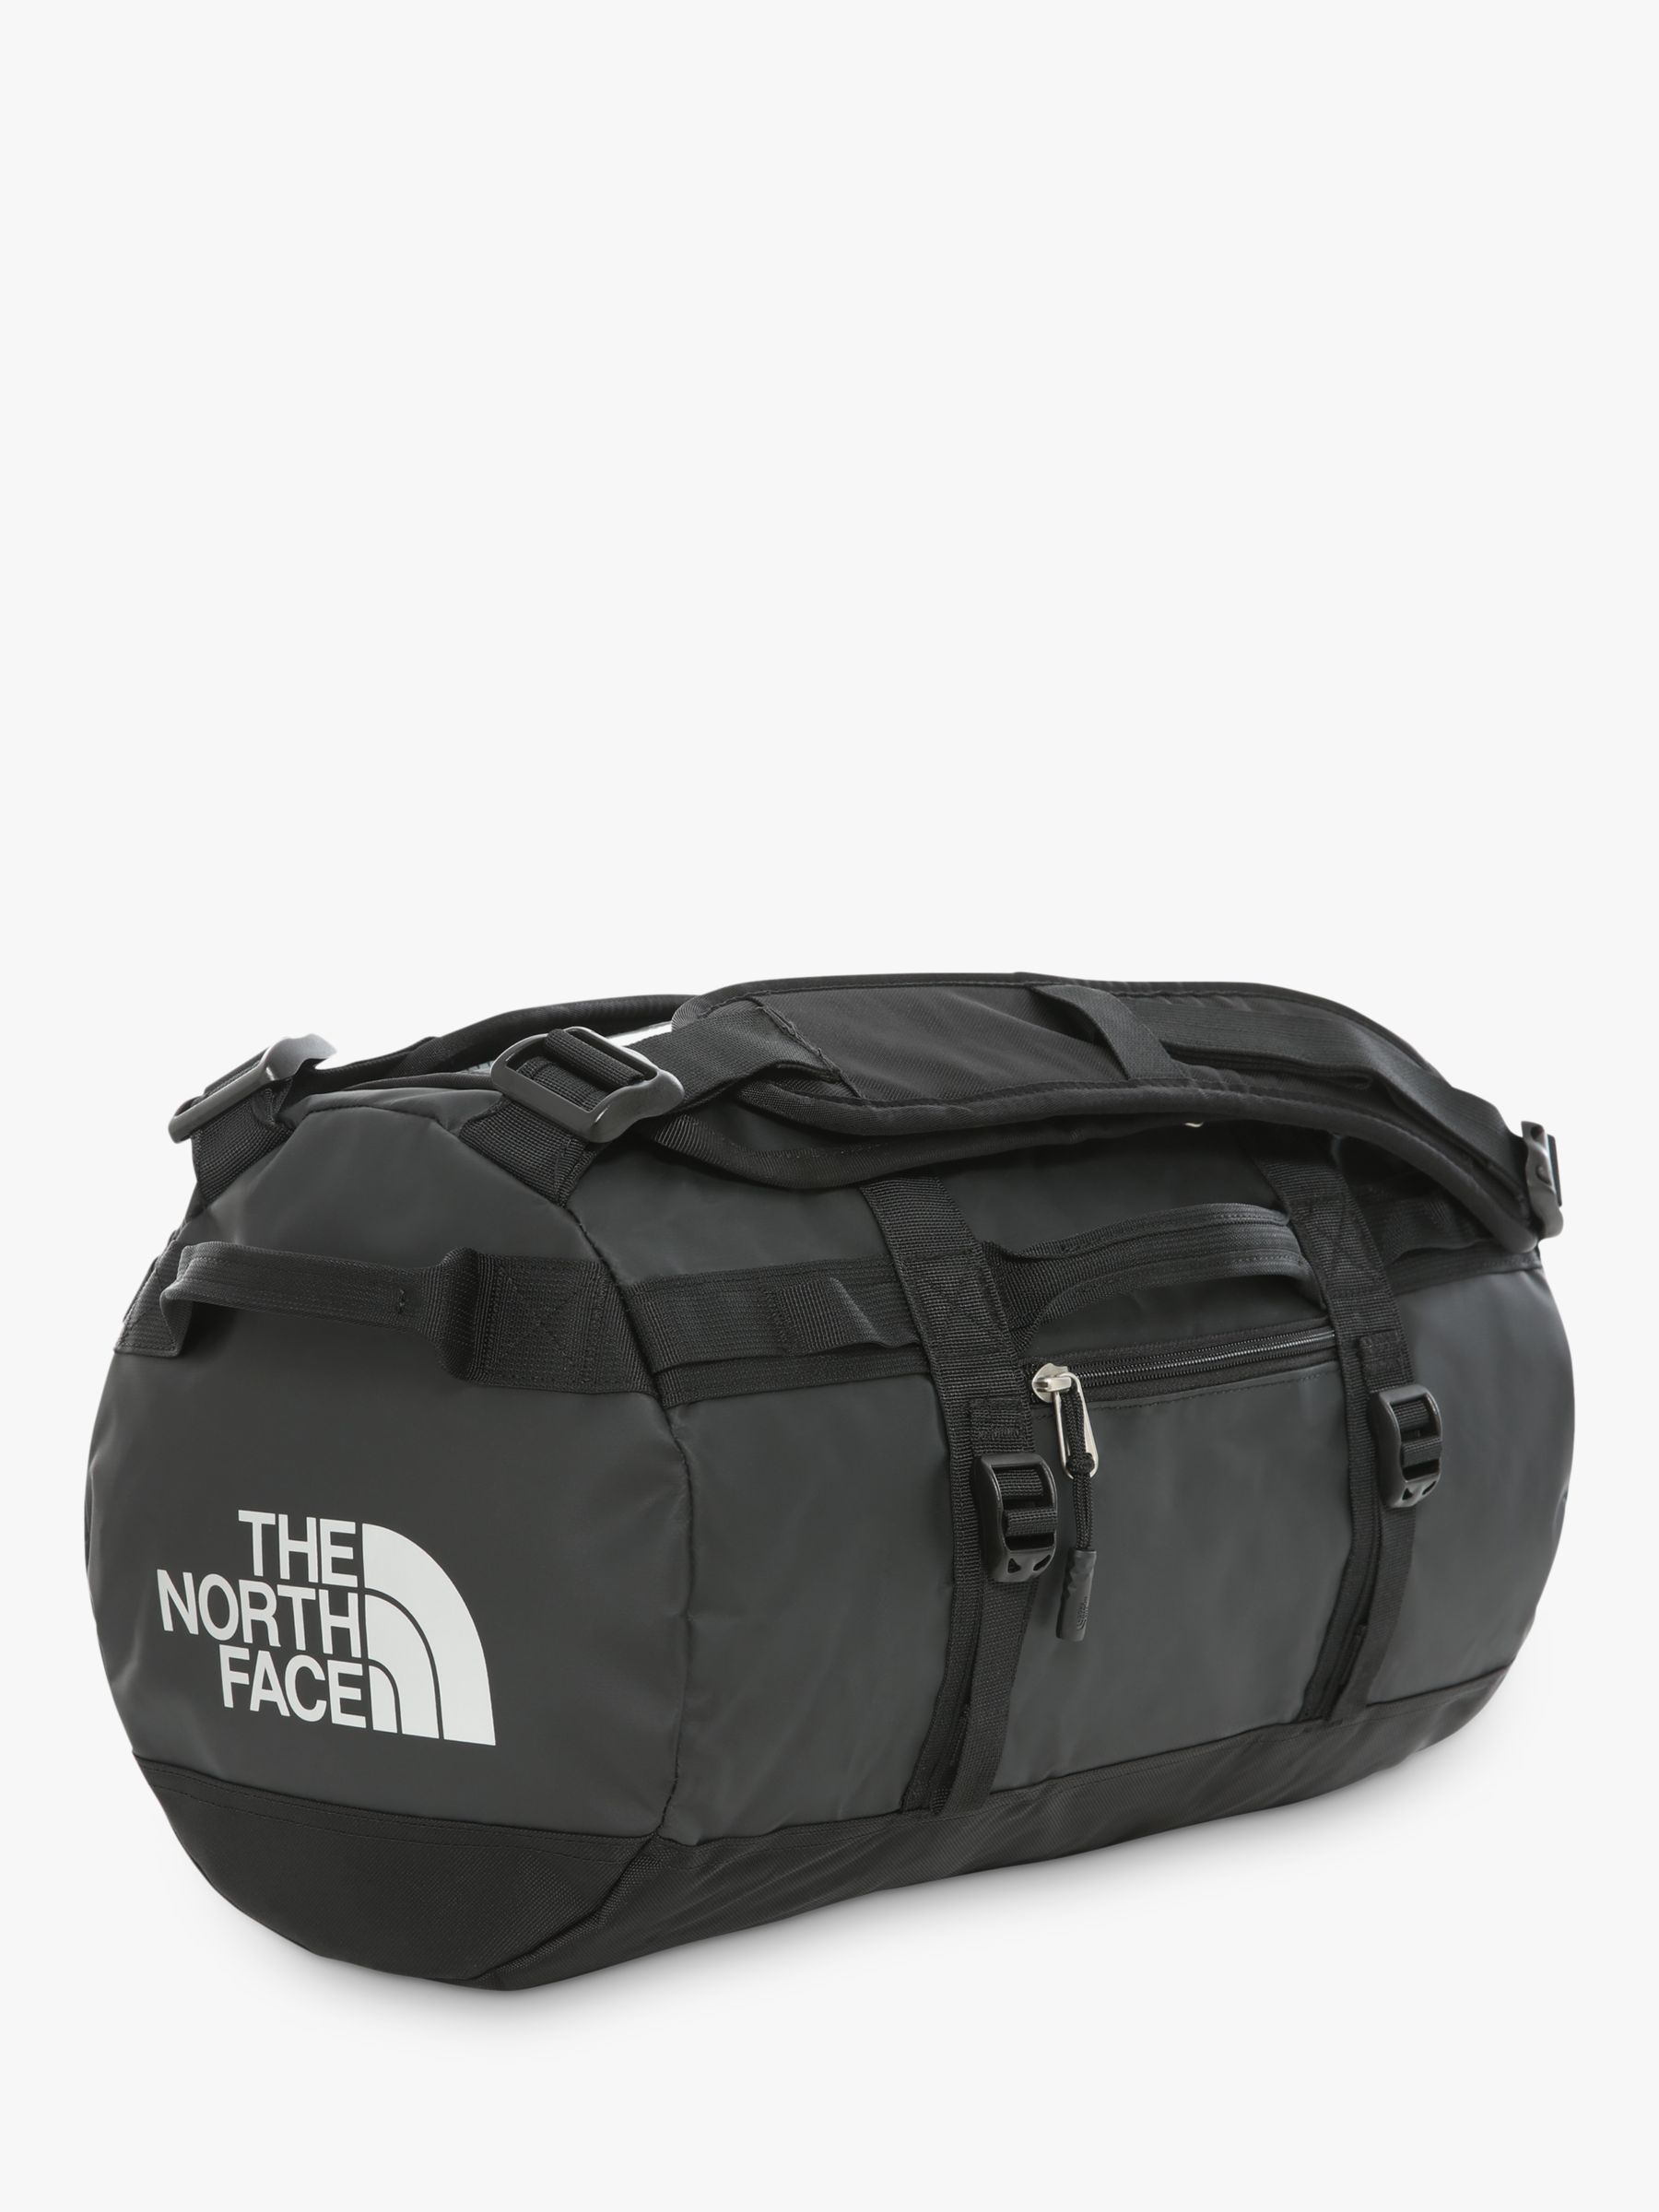 north face small duffel hand luggage